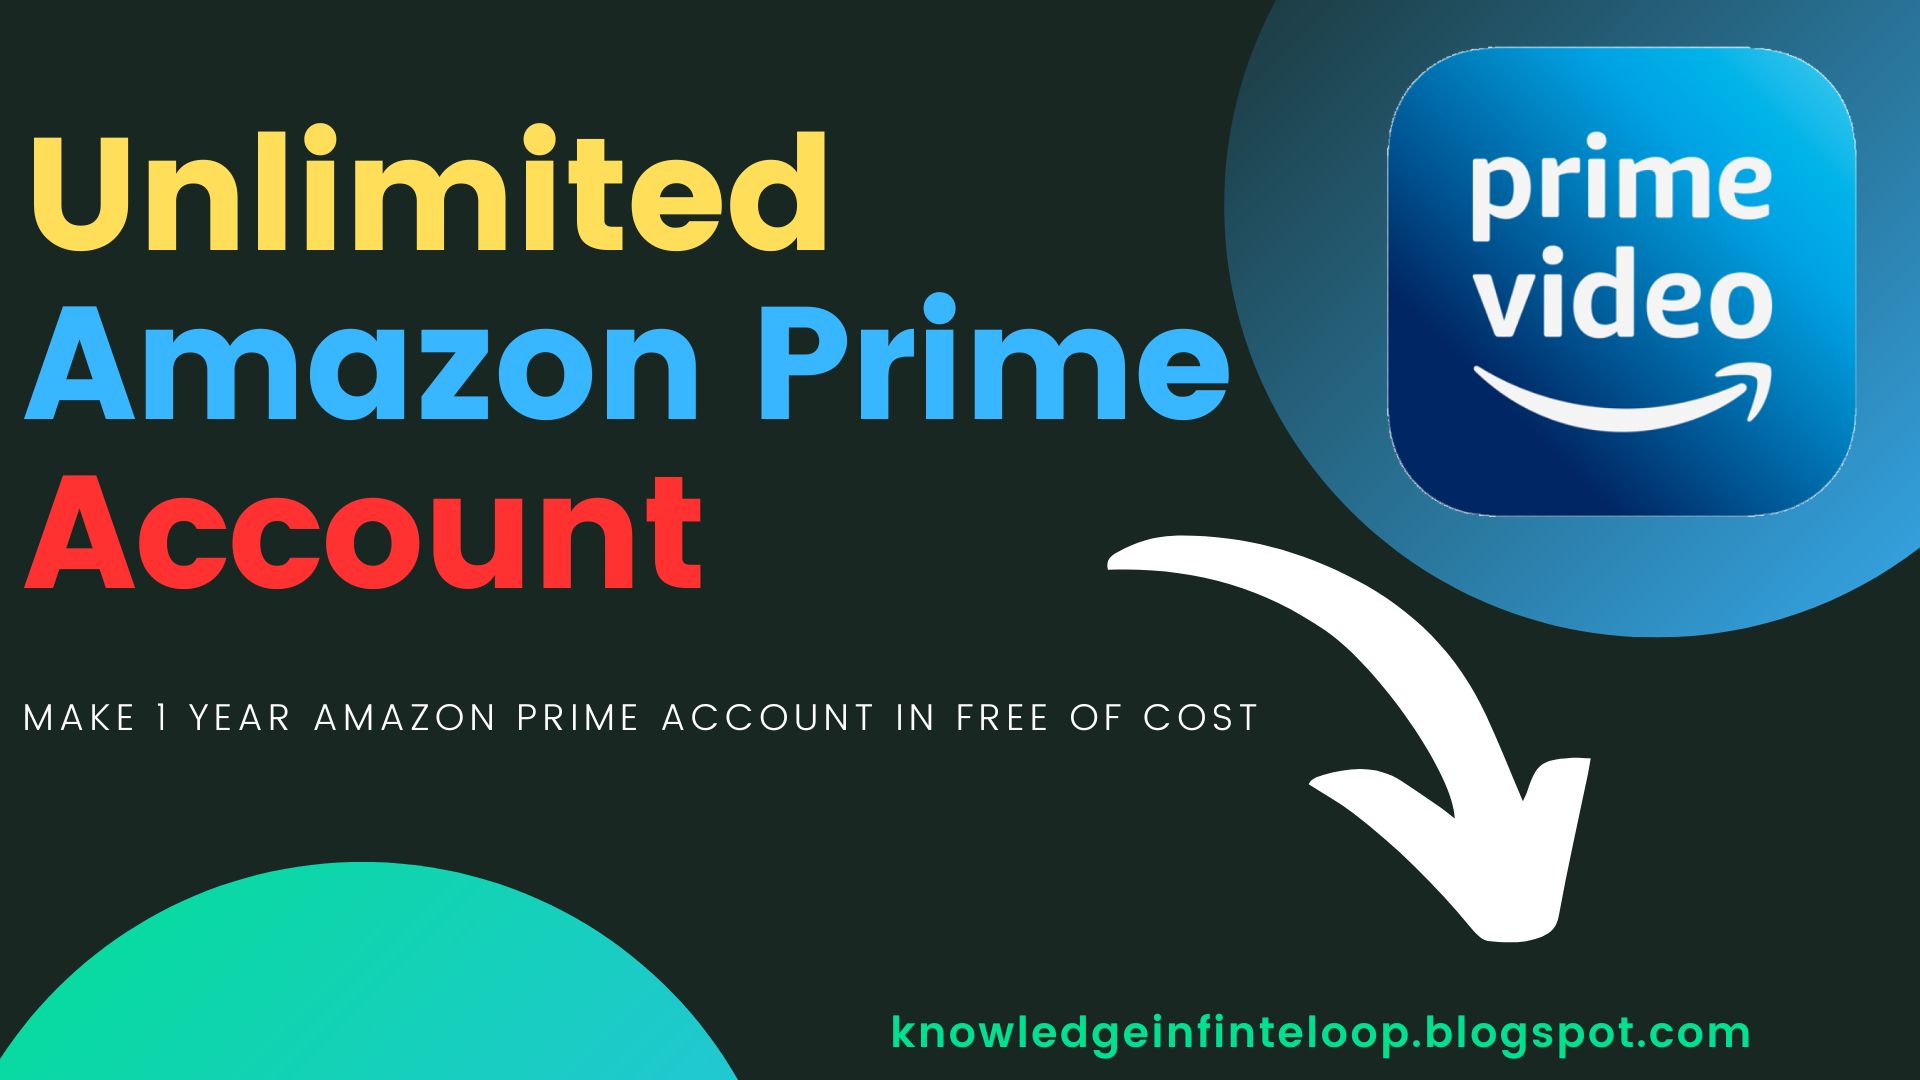 [Unlimited Accounts]⚡  Amazon Prime 1 Year Premium Account in Free of Cost ⚡ - Devils Hacking-knowledgeinfinteloop.blogspot.com